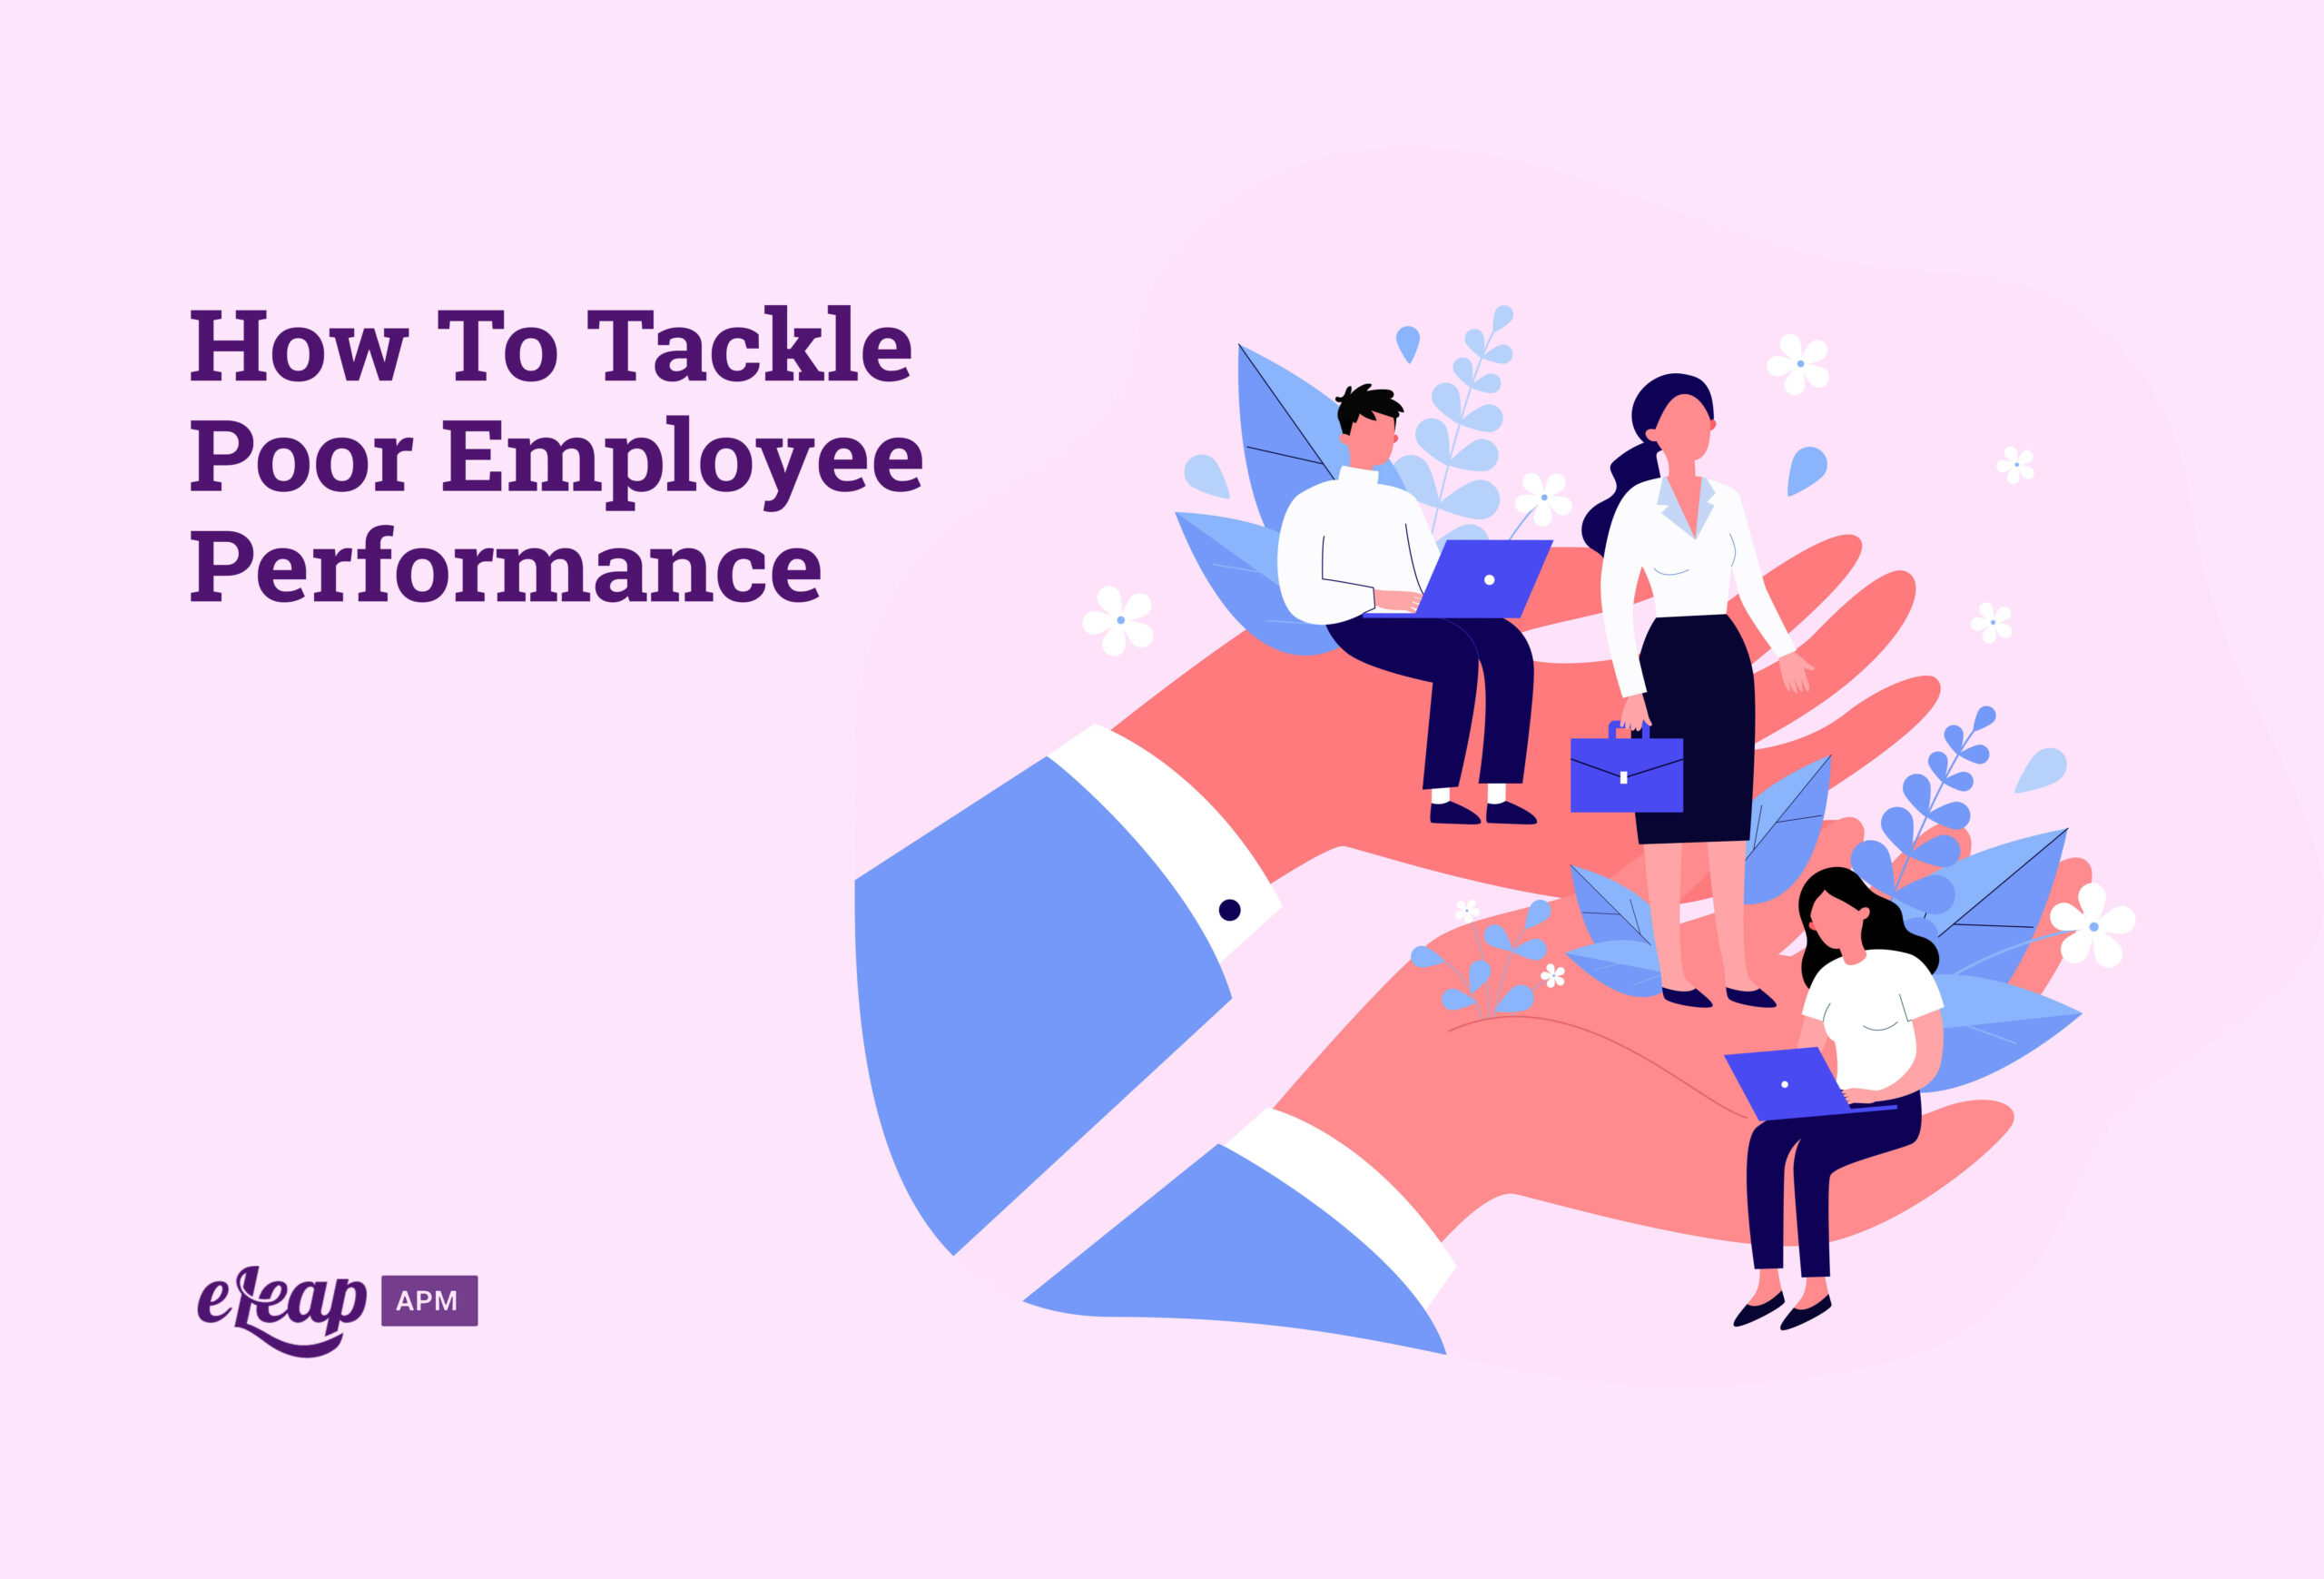 How To Tackle Poor Employee Performance